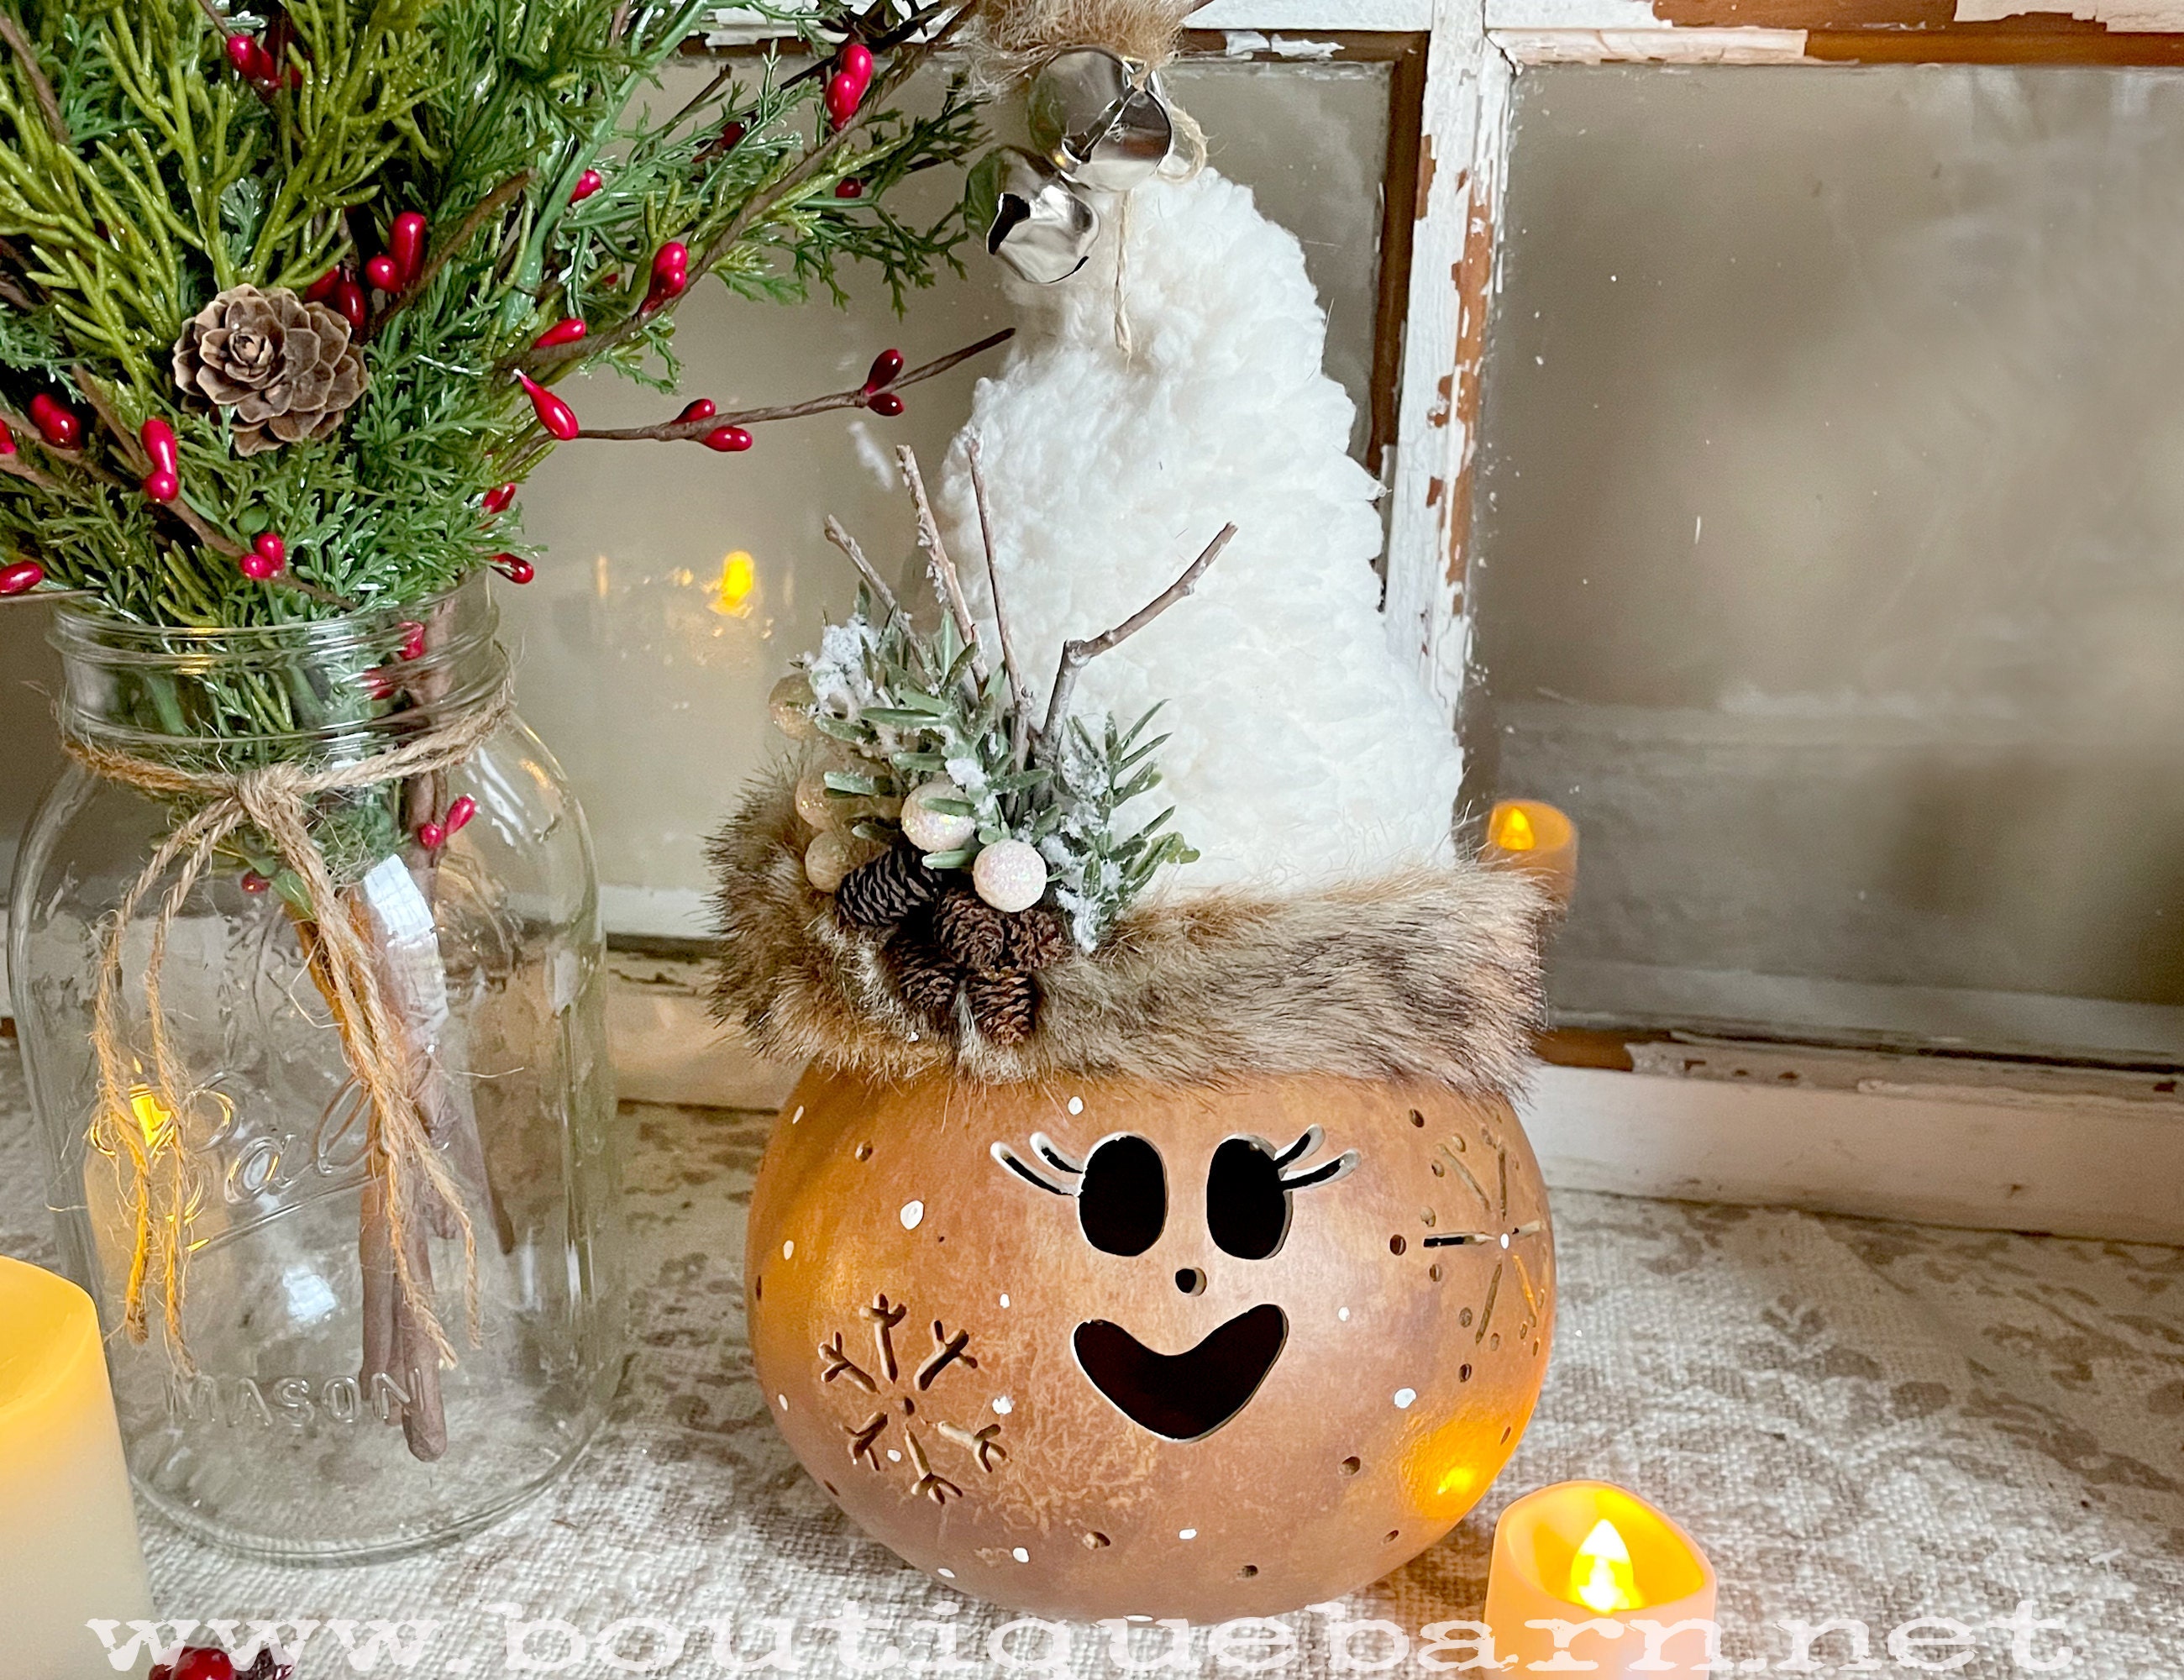 Handmade Christmas Elf decoration. A real dried gourd with a carved Elf face and snowflakes. A candle is included to ligght up the gourd. Her name is Tinsel. She had a handmade Sherpa and faux fur hat.